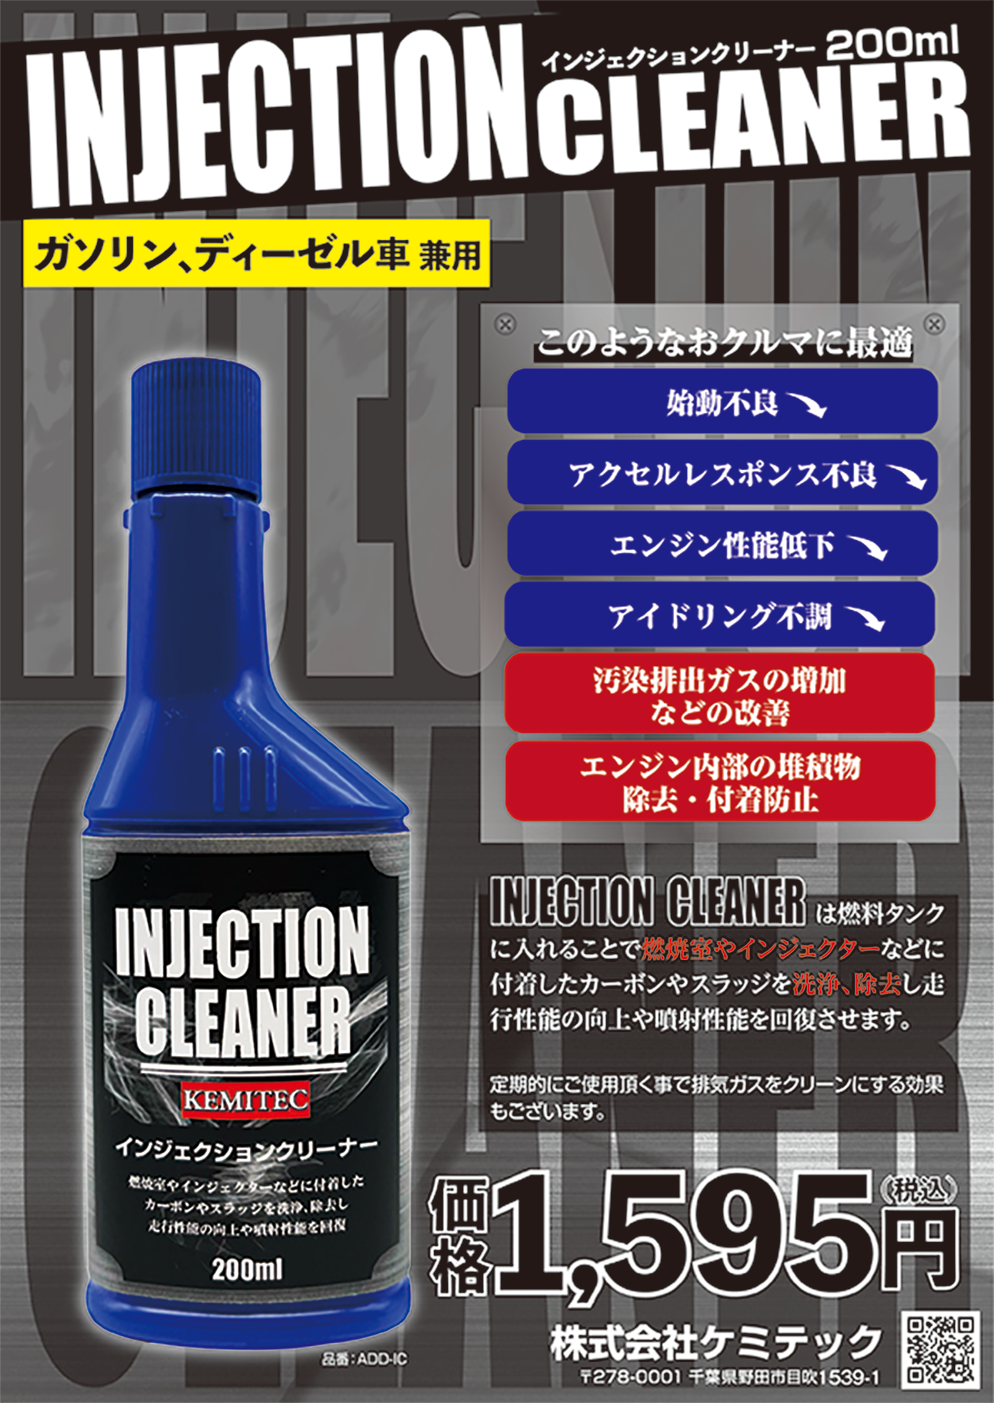 INJECTION CLEANER